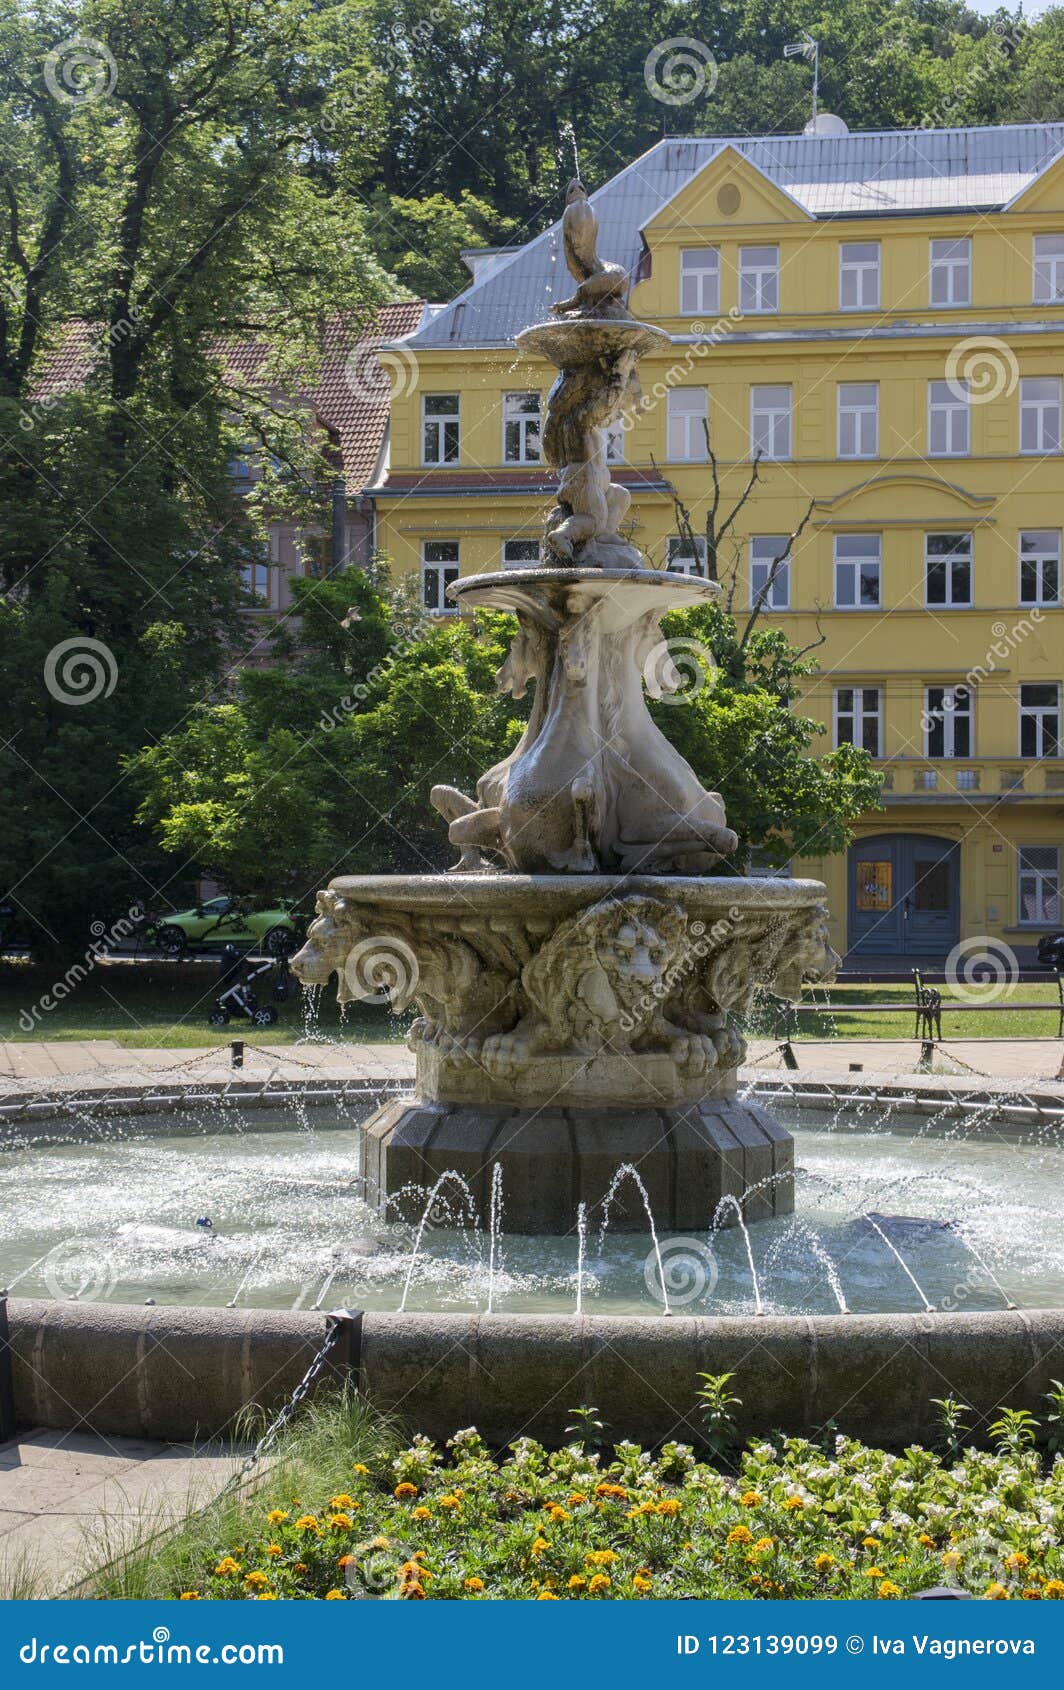 Stone Spa And Marble Horse Fountain In Town Teplice V Cechach